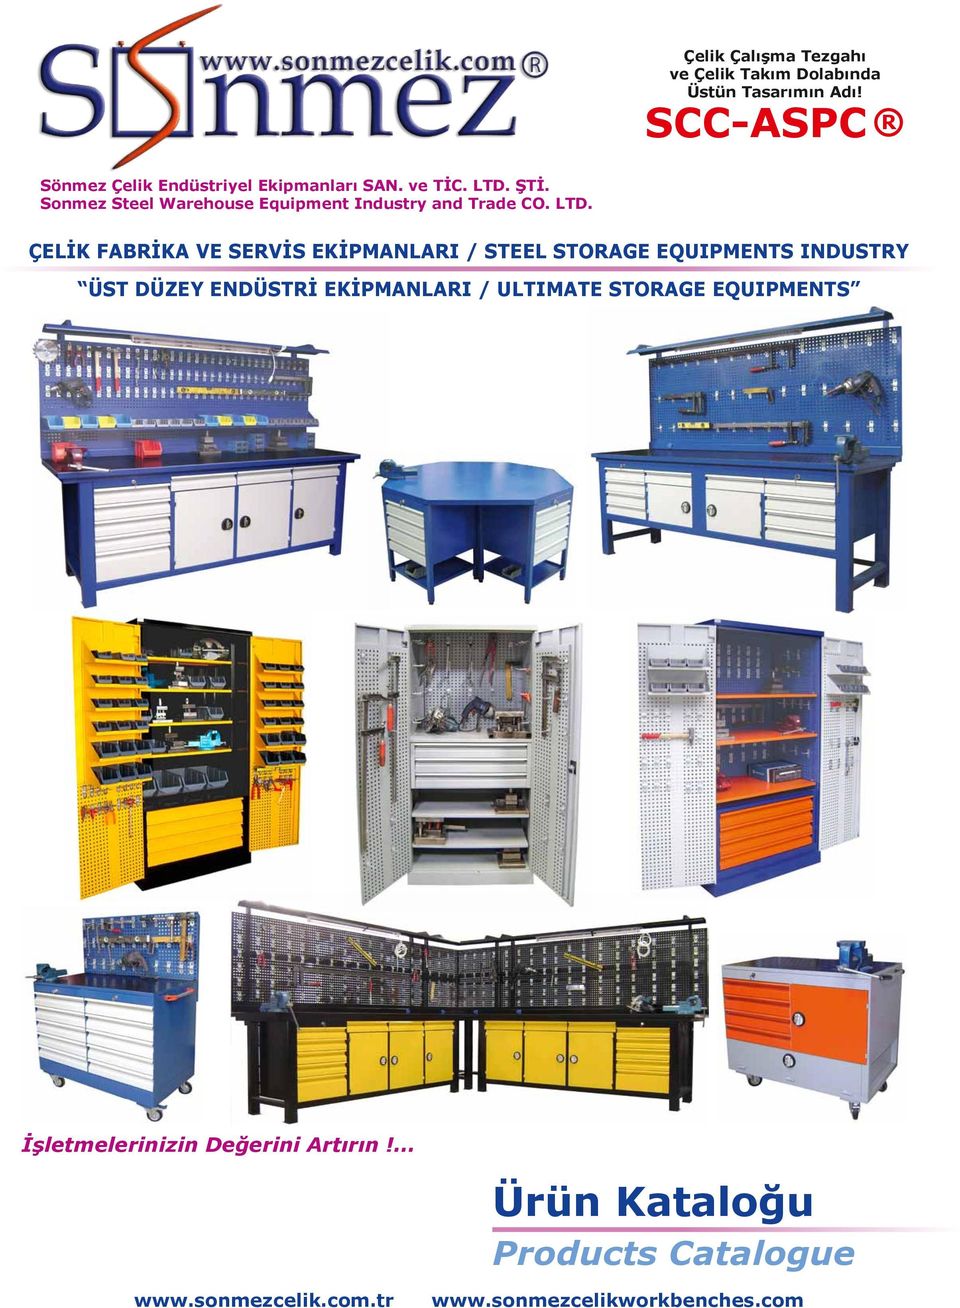 Sonmez Steel Warehouse Equipment Industry and Trade CO. LTD.